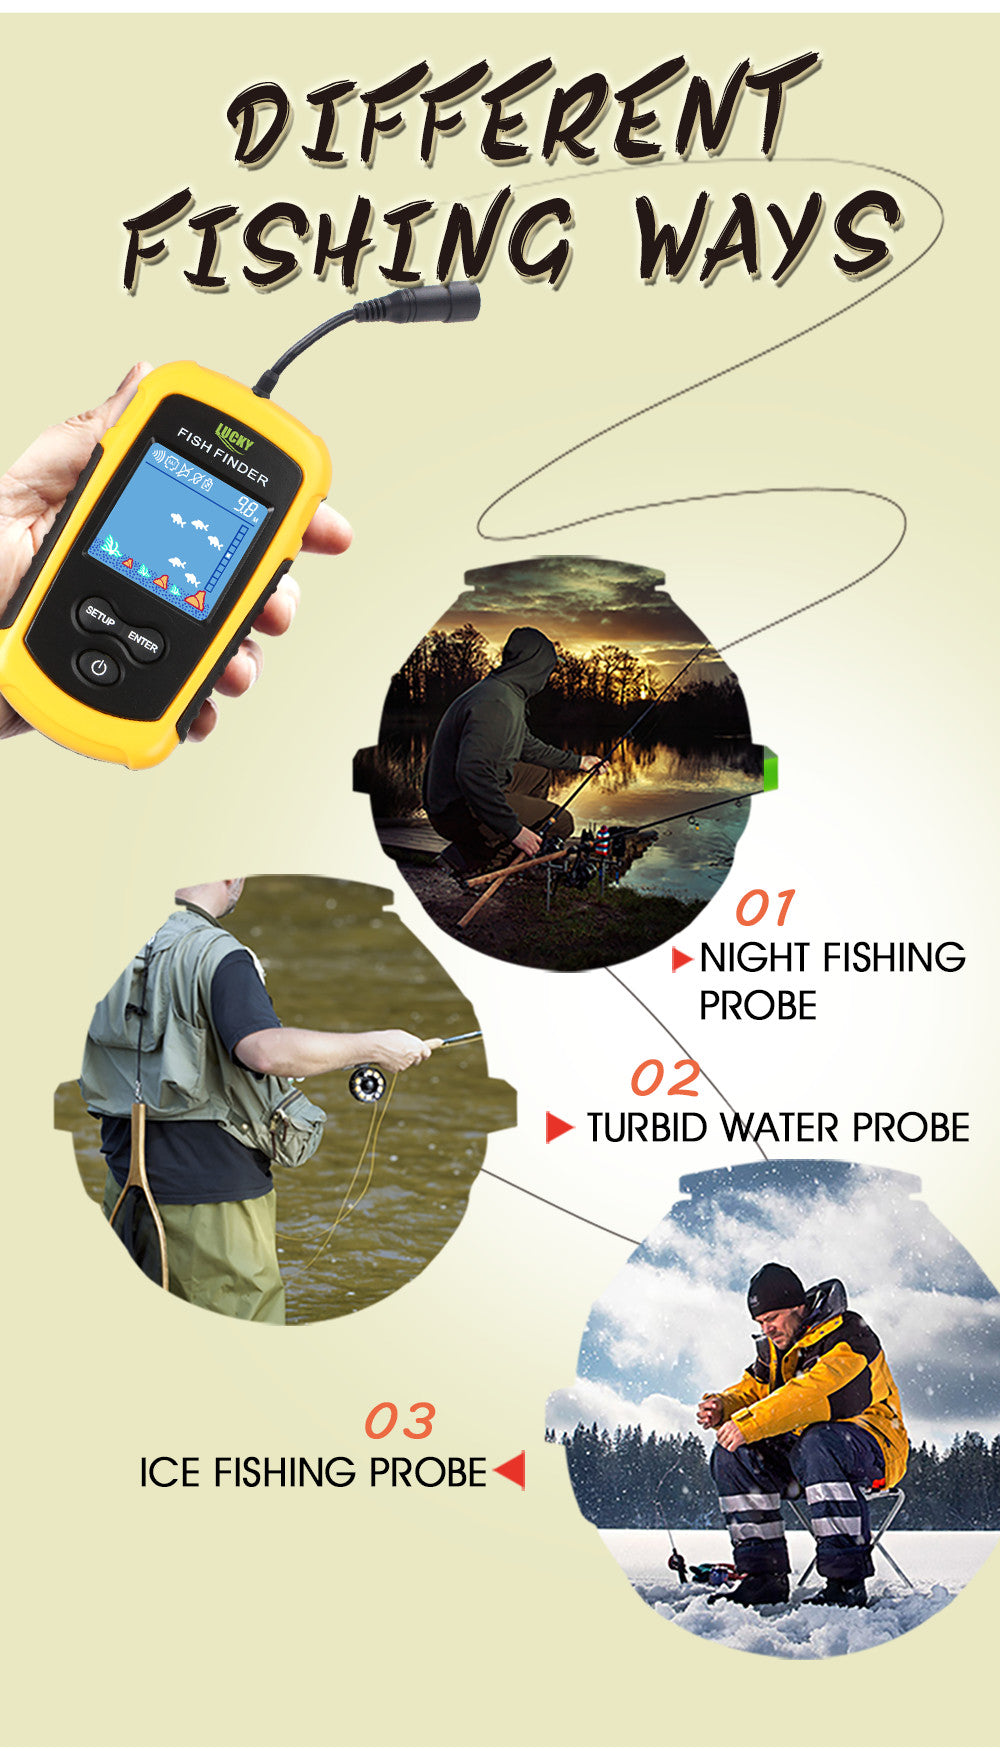 Best 100M Portable Sonar Fish Finders Fishing in 2022